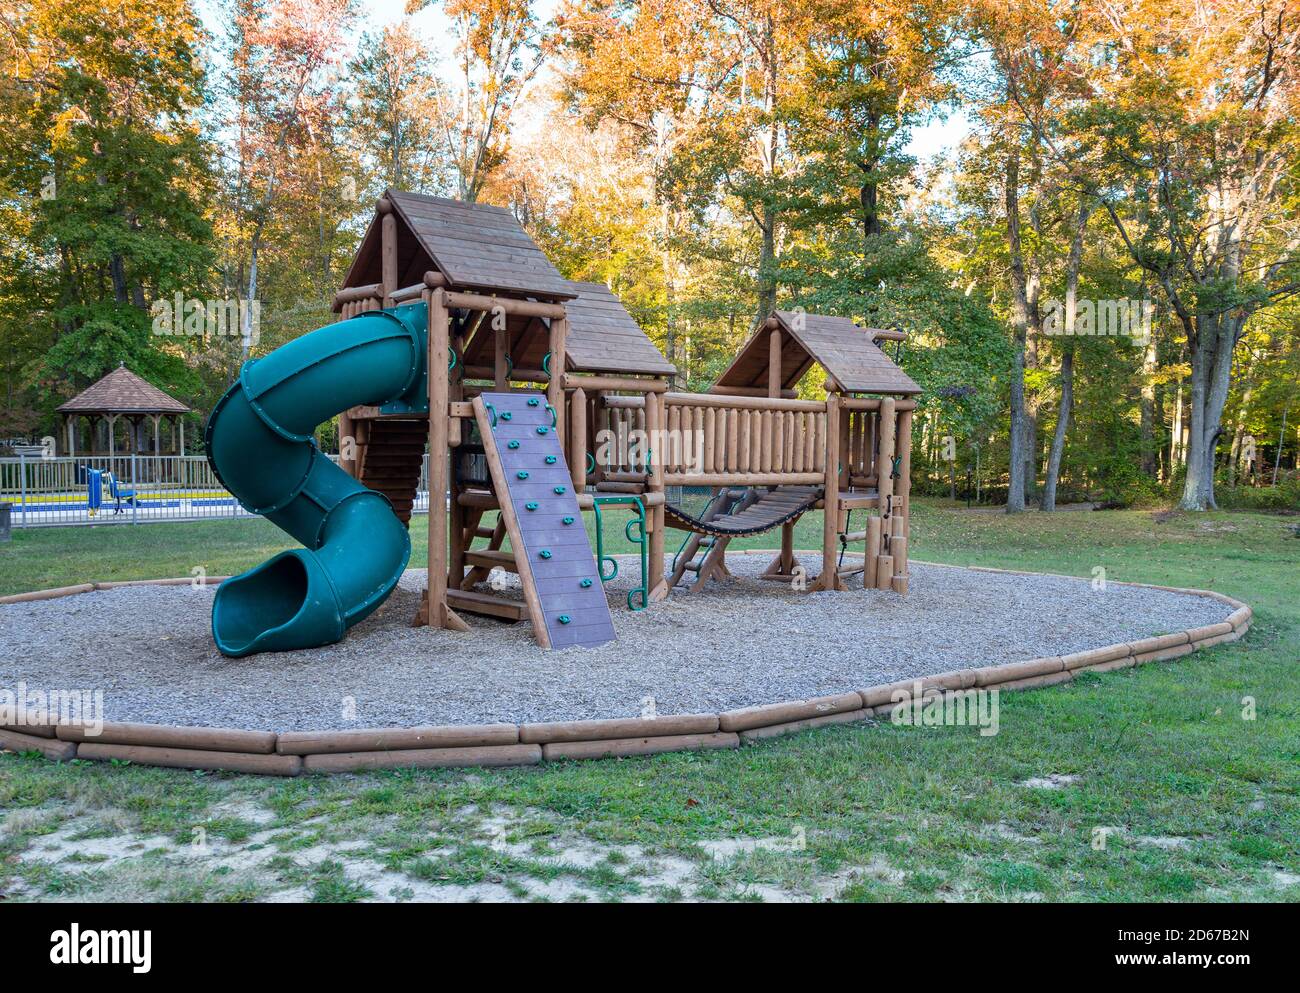 A large outdoor children's play area in a woodland setting. Stock Photo